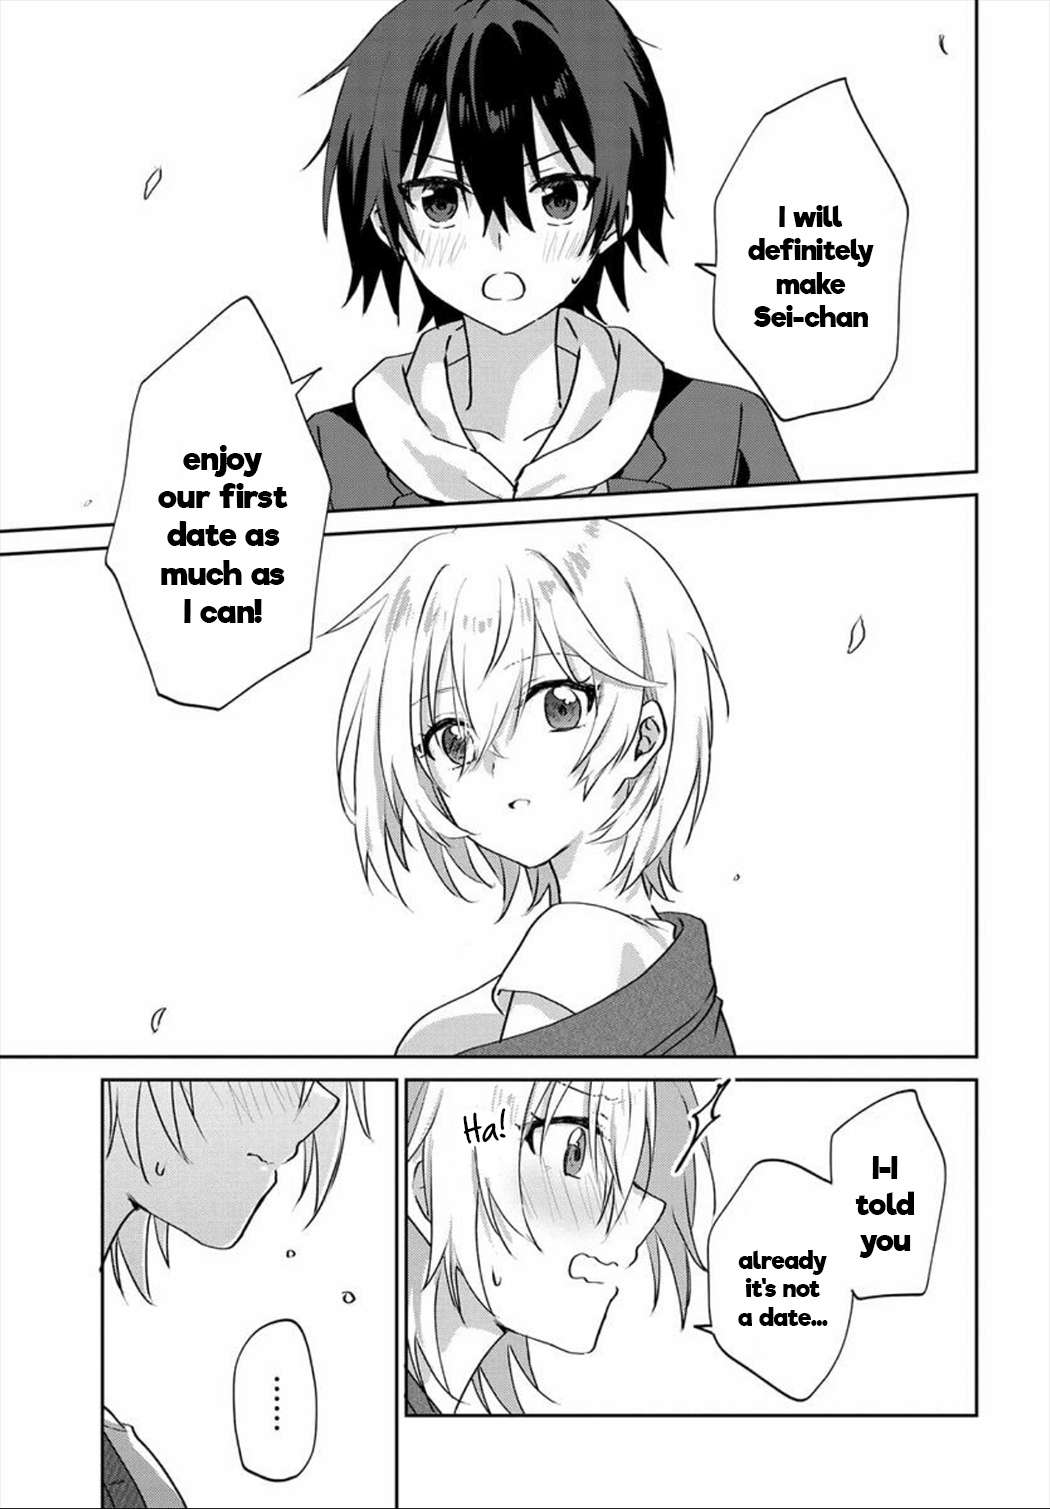 Since I’ve Entered the World of Romantic Comedy Manga, I’ll Do My Best to Make the Losing Heroine Happy. - chapter 6.2 - #2